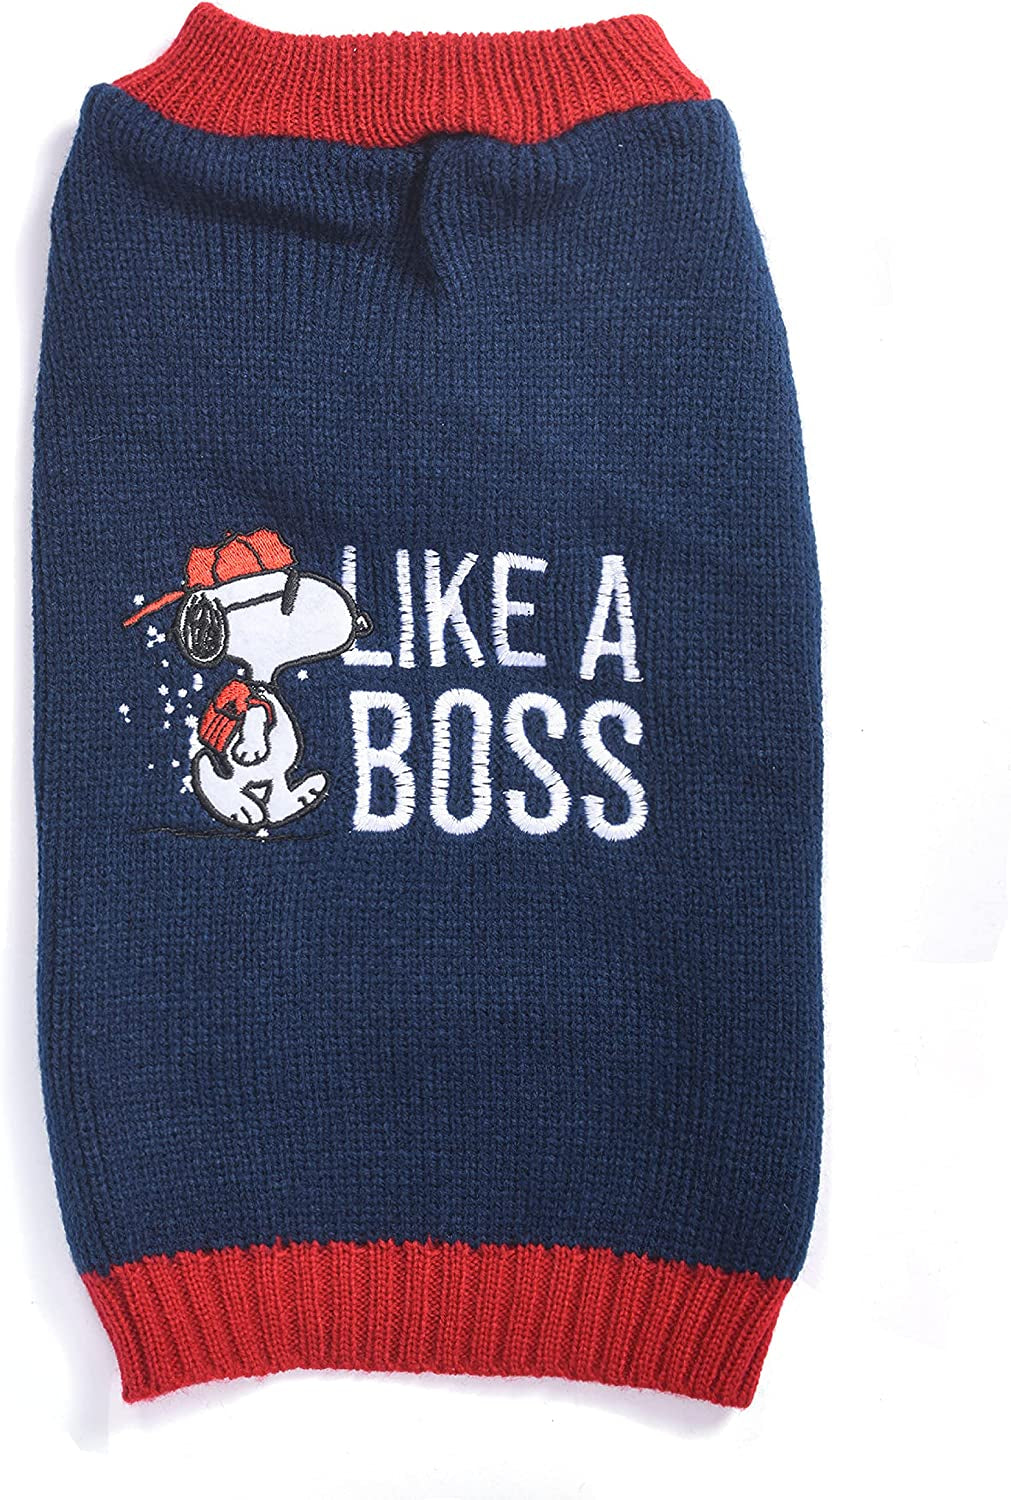 Peanuts for Pets Snoopy "Like a Boss" Dog Sweater, Medium | Soft and Comfortable Dog Apparel Dog Clothing Dog Shirt | Peanuts Snoopy Medium Dog Sweater, Medium Dog Shirt for Medium Dogs Animals & Pet Supplies > Pet Supplies > Dog Supplies > Dog Apparel Fetch for Pets Navy Large 